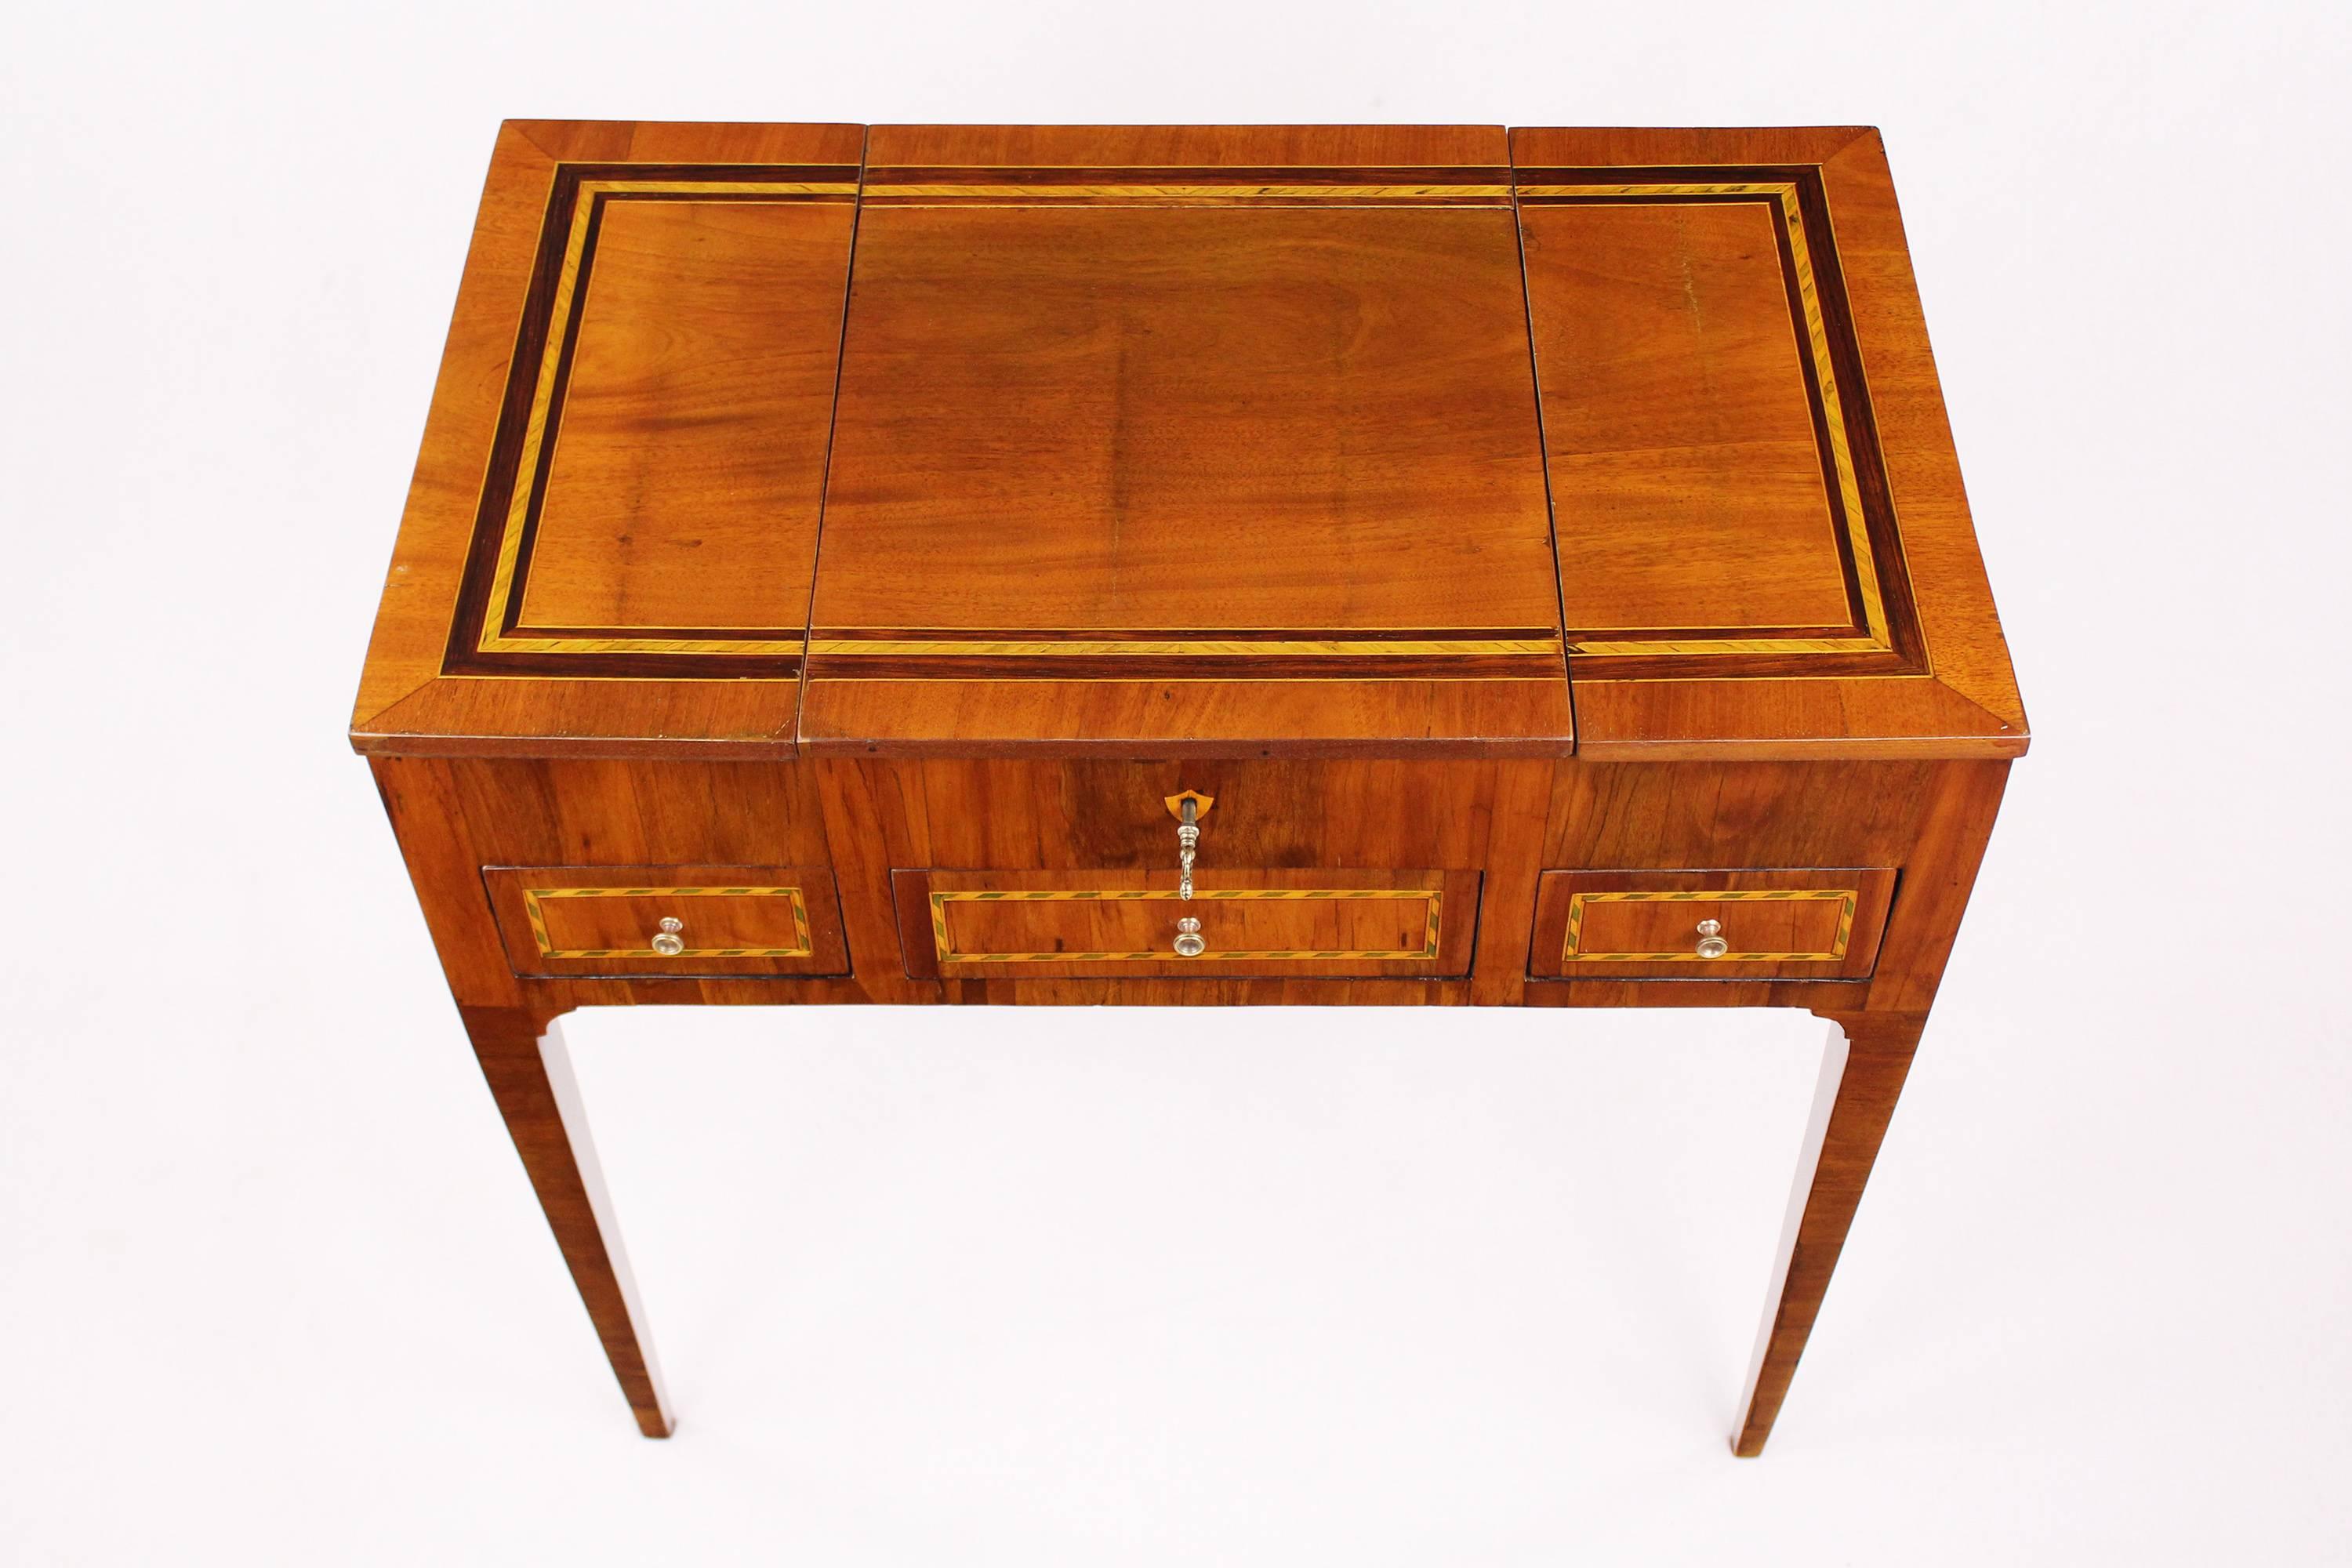 Early 19th Century Dressing Table, Poudreuse, Mahogany Veneered, Marquetry Works im Zustand „Gut“ in Muenster, NRW